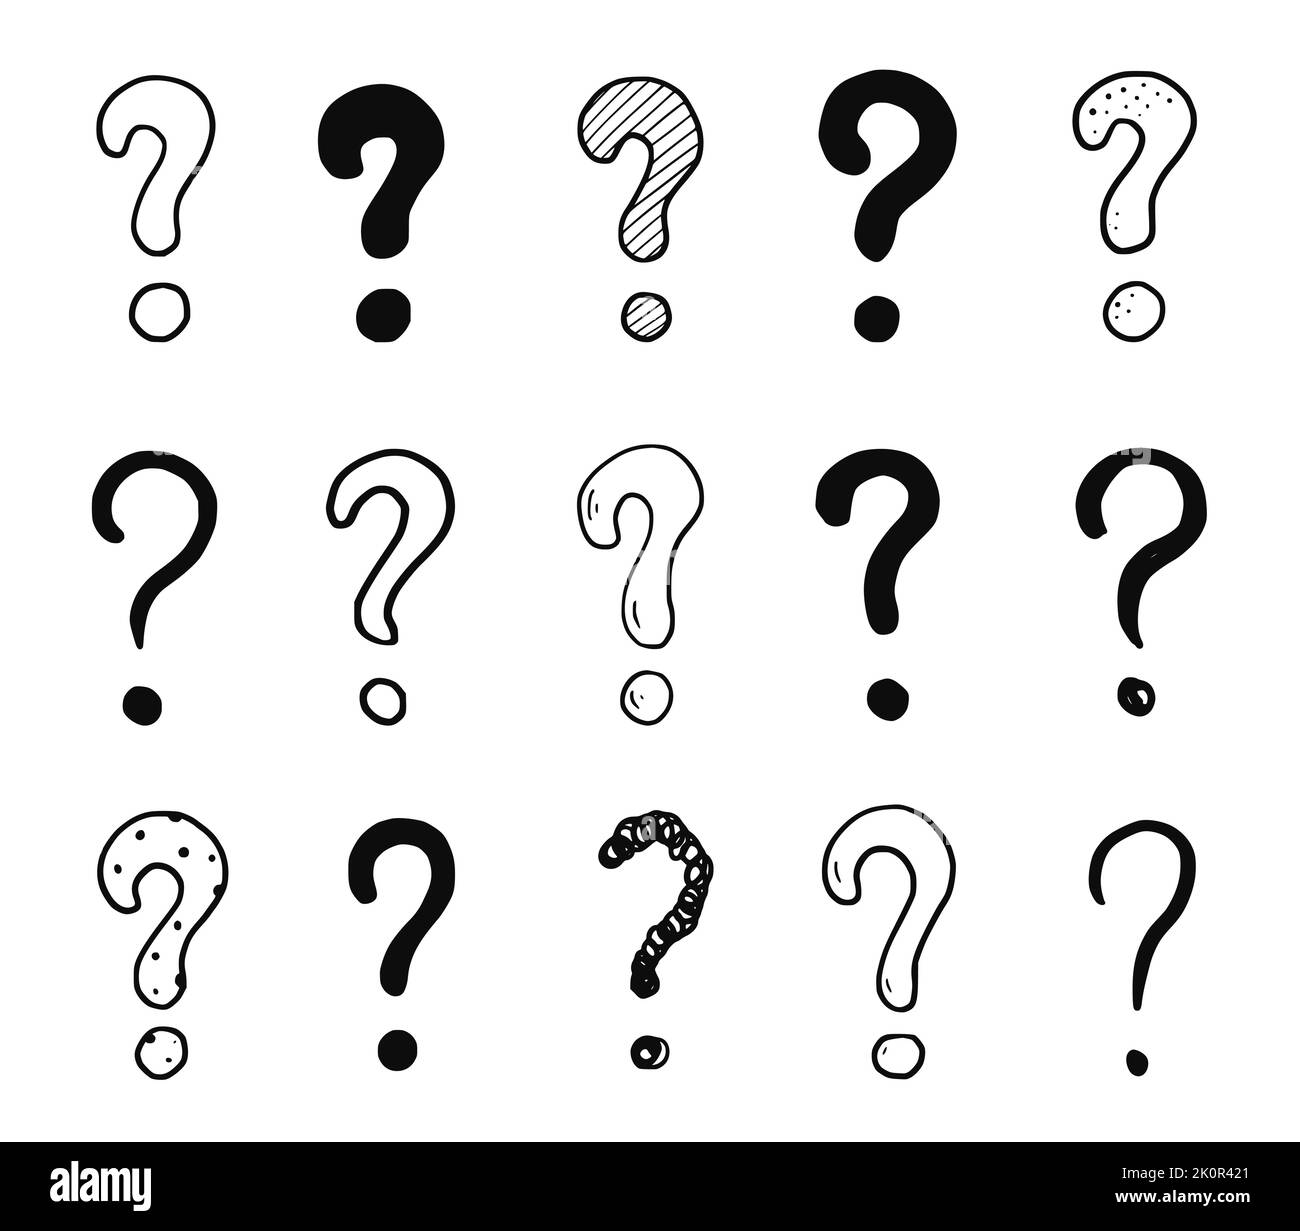 Doodle question sign mark set. Hand drawn sketch style ask sign, question mark. Isolated vector illustration. Stock Vector